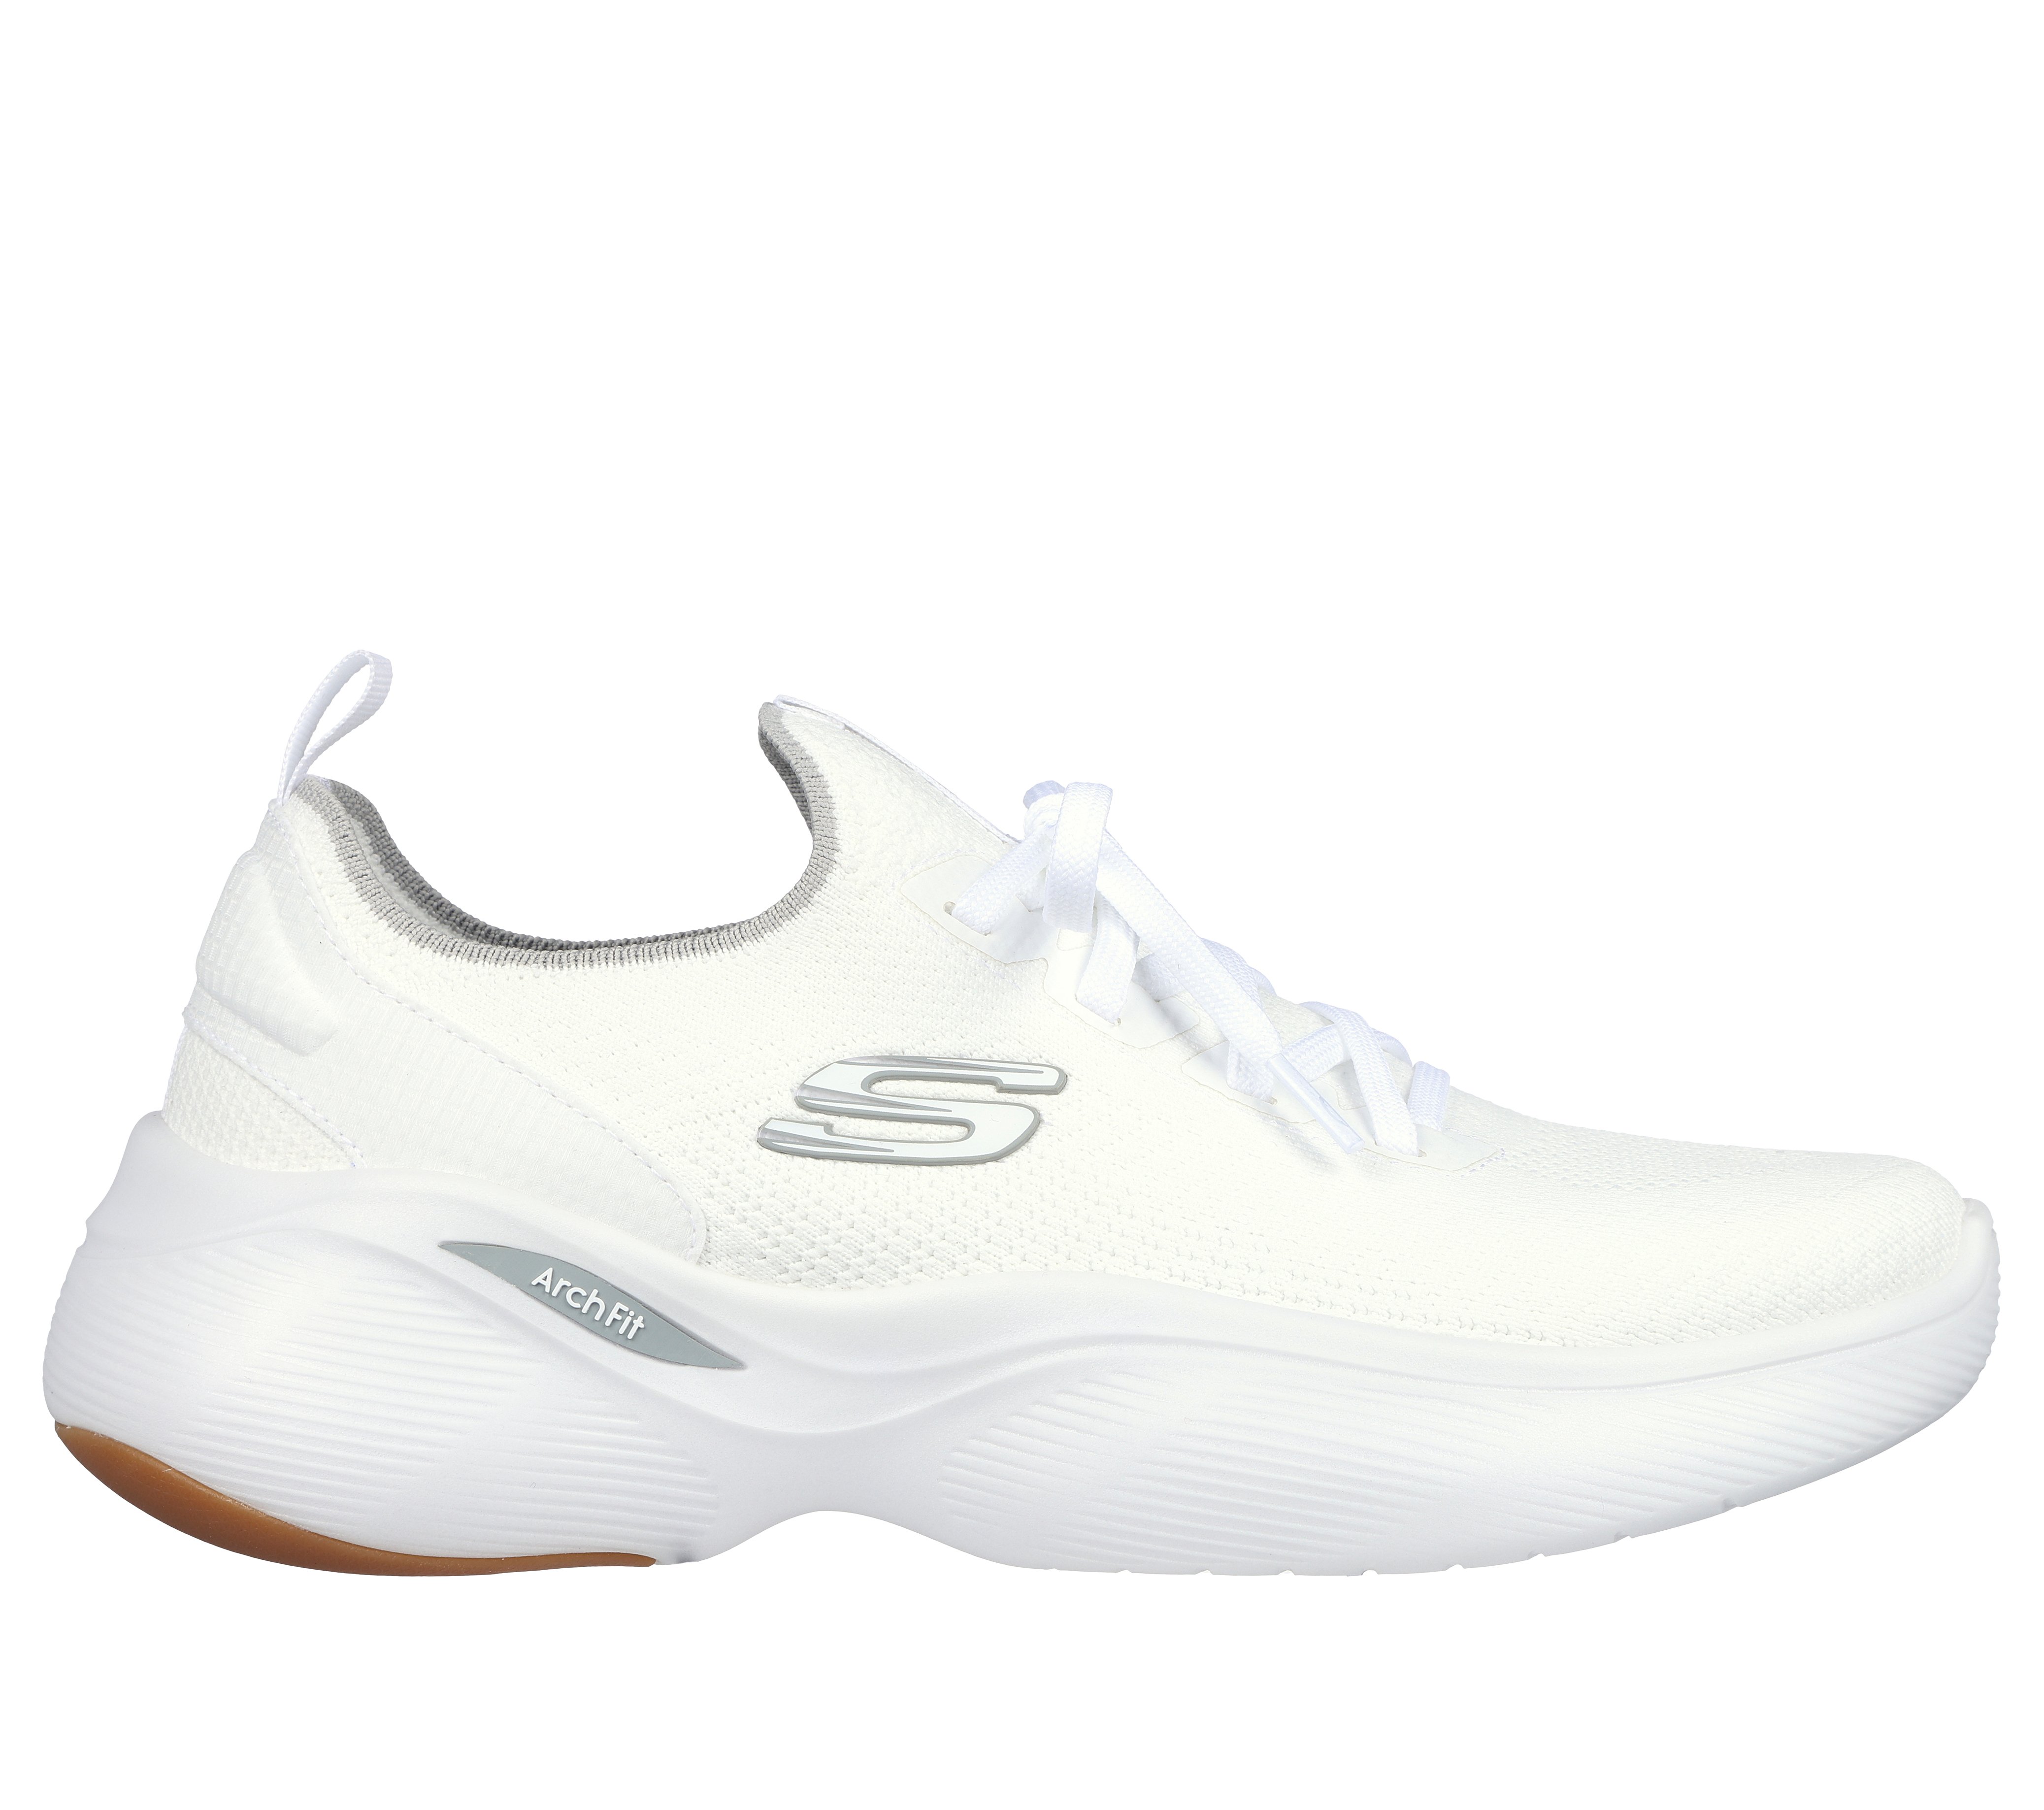 Arch Fit Infinity Stormlight | SKECHERS